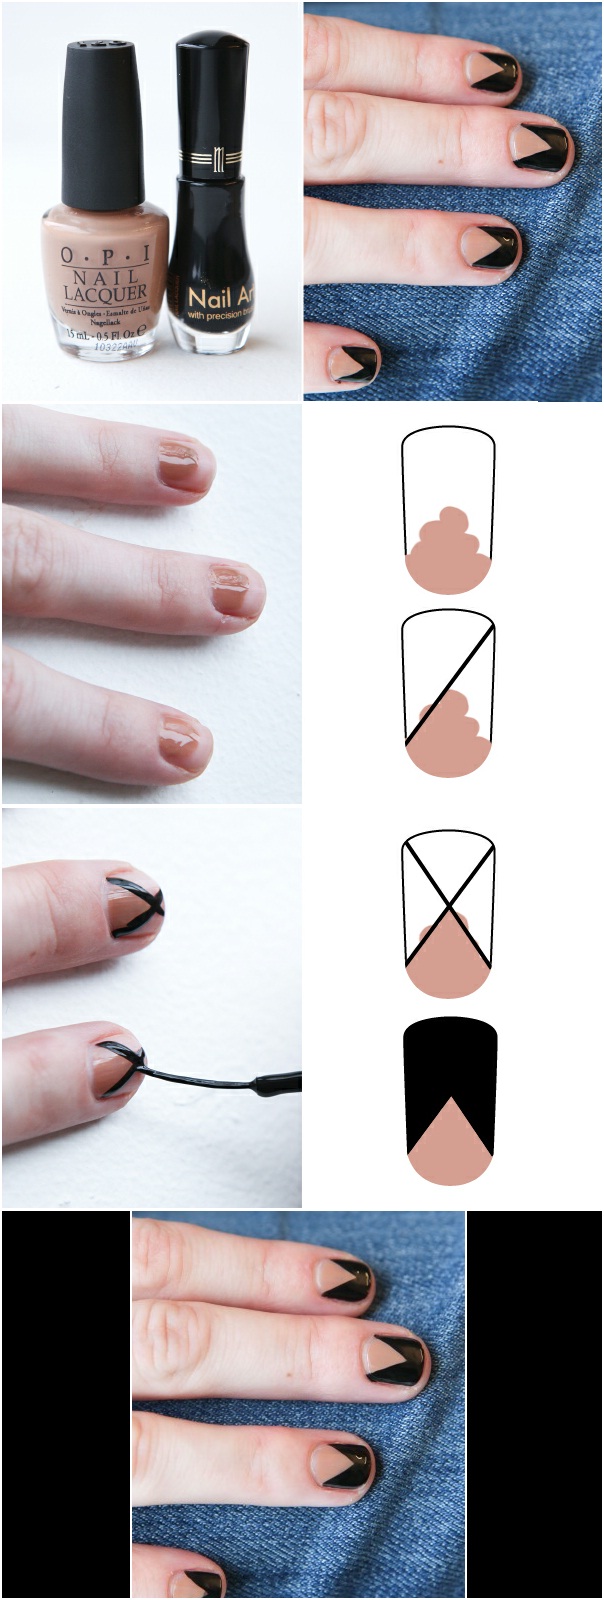 Beauty Tutorials ― Split Nails : This chevron design is a way sophisticated